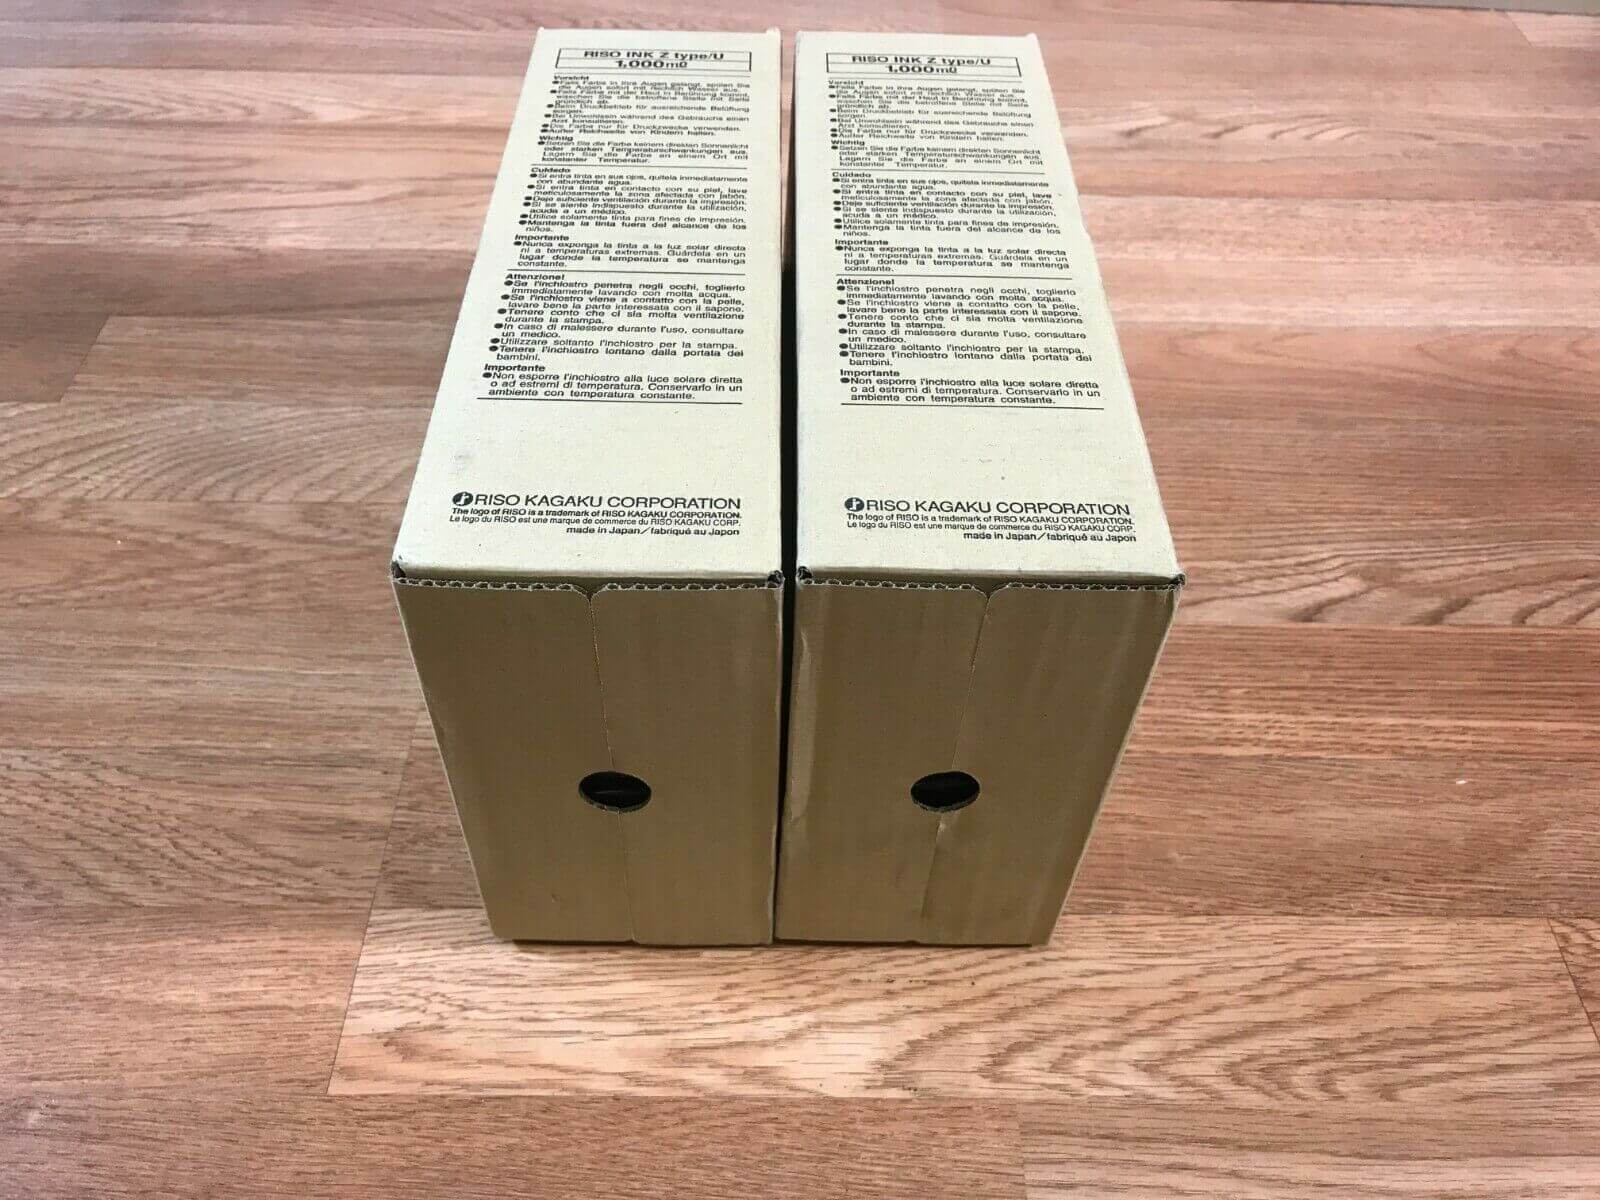 2 Genuine Riso Black Ink S-7605 Z typeU 2 Cartridges Per Box Same Day Shipping!! - copier-clearance-center